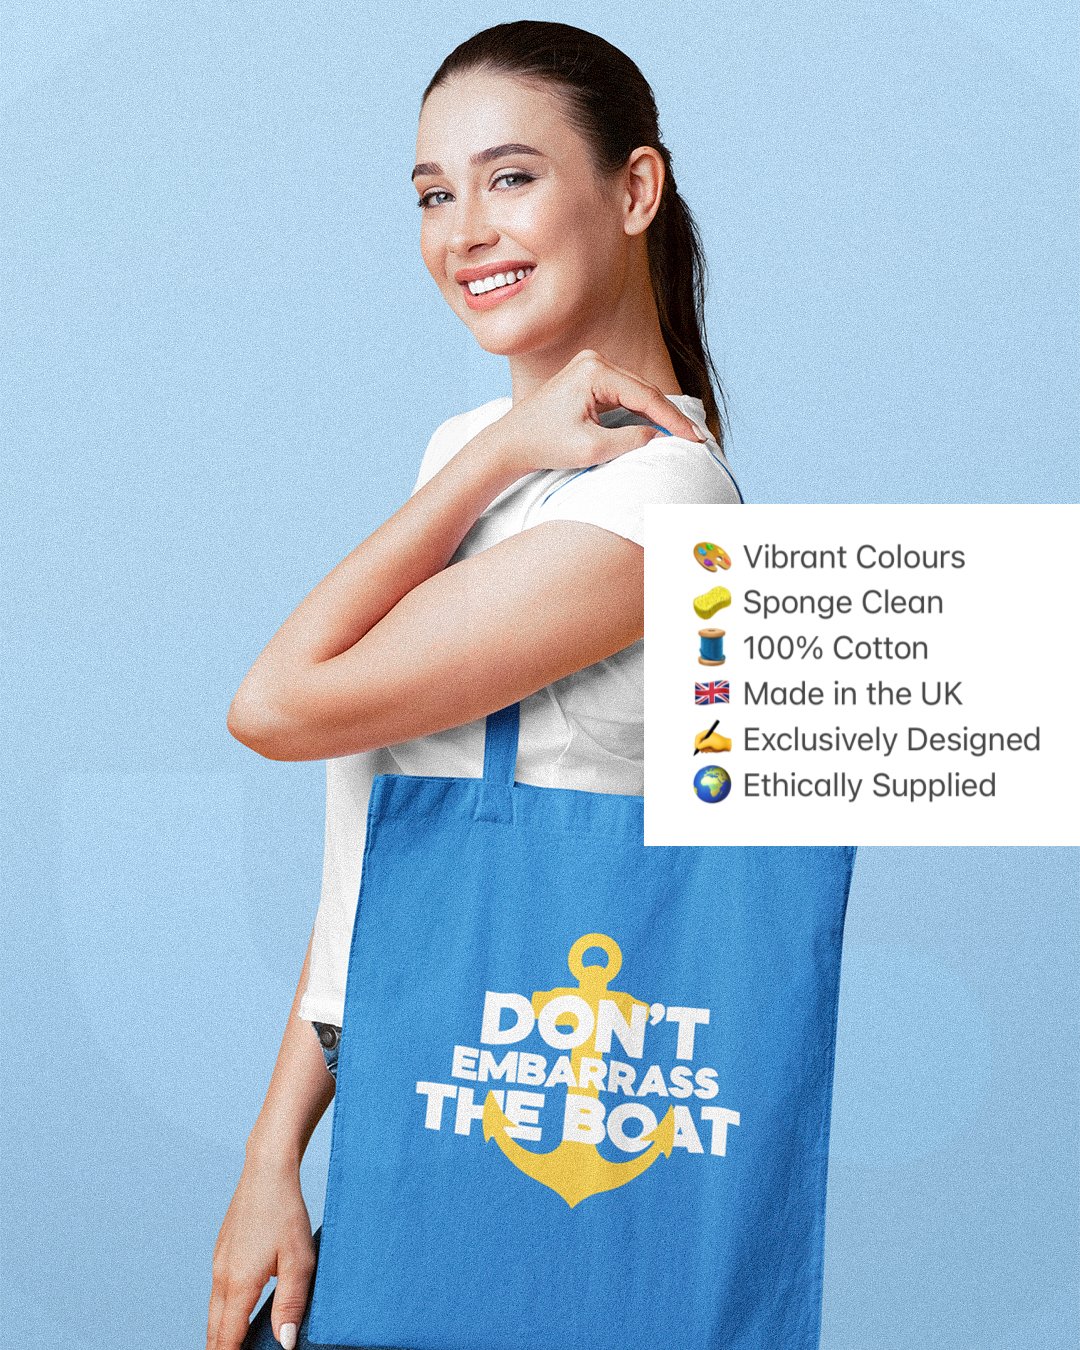 Don't Embarrass The Boat Tote Bag - Captain Below Deck Inspired Tote Bag - Don't Embarrass The Boat Below Deck Inspired Tote Bag